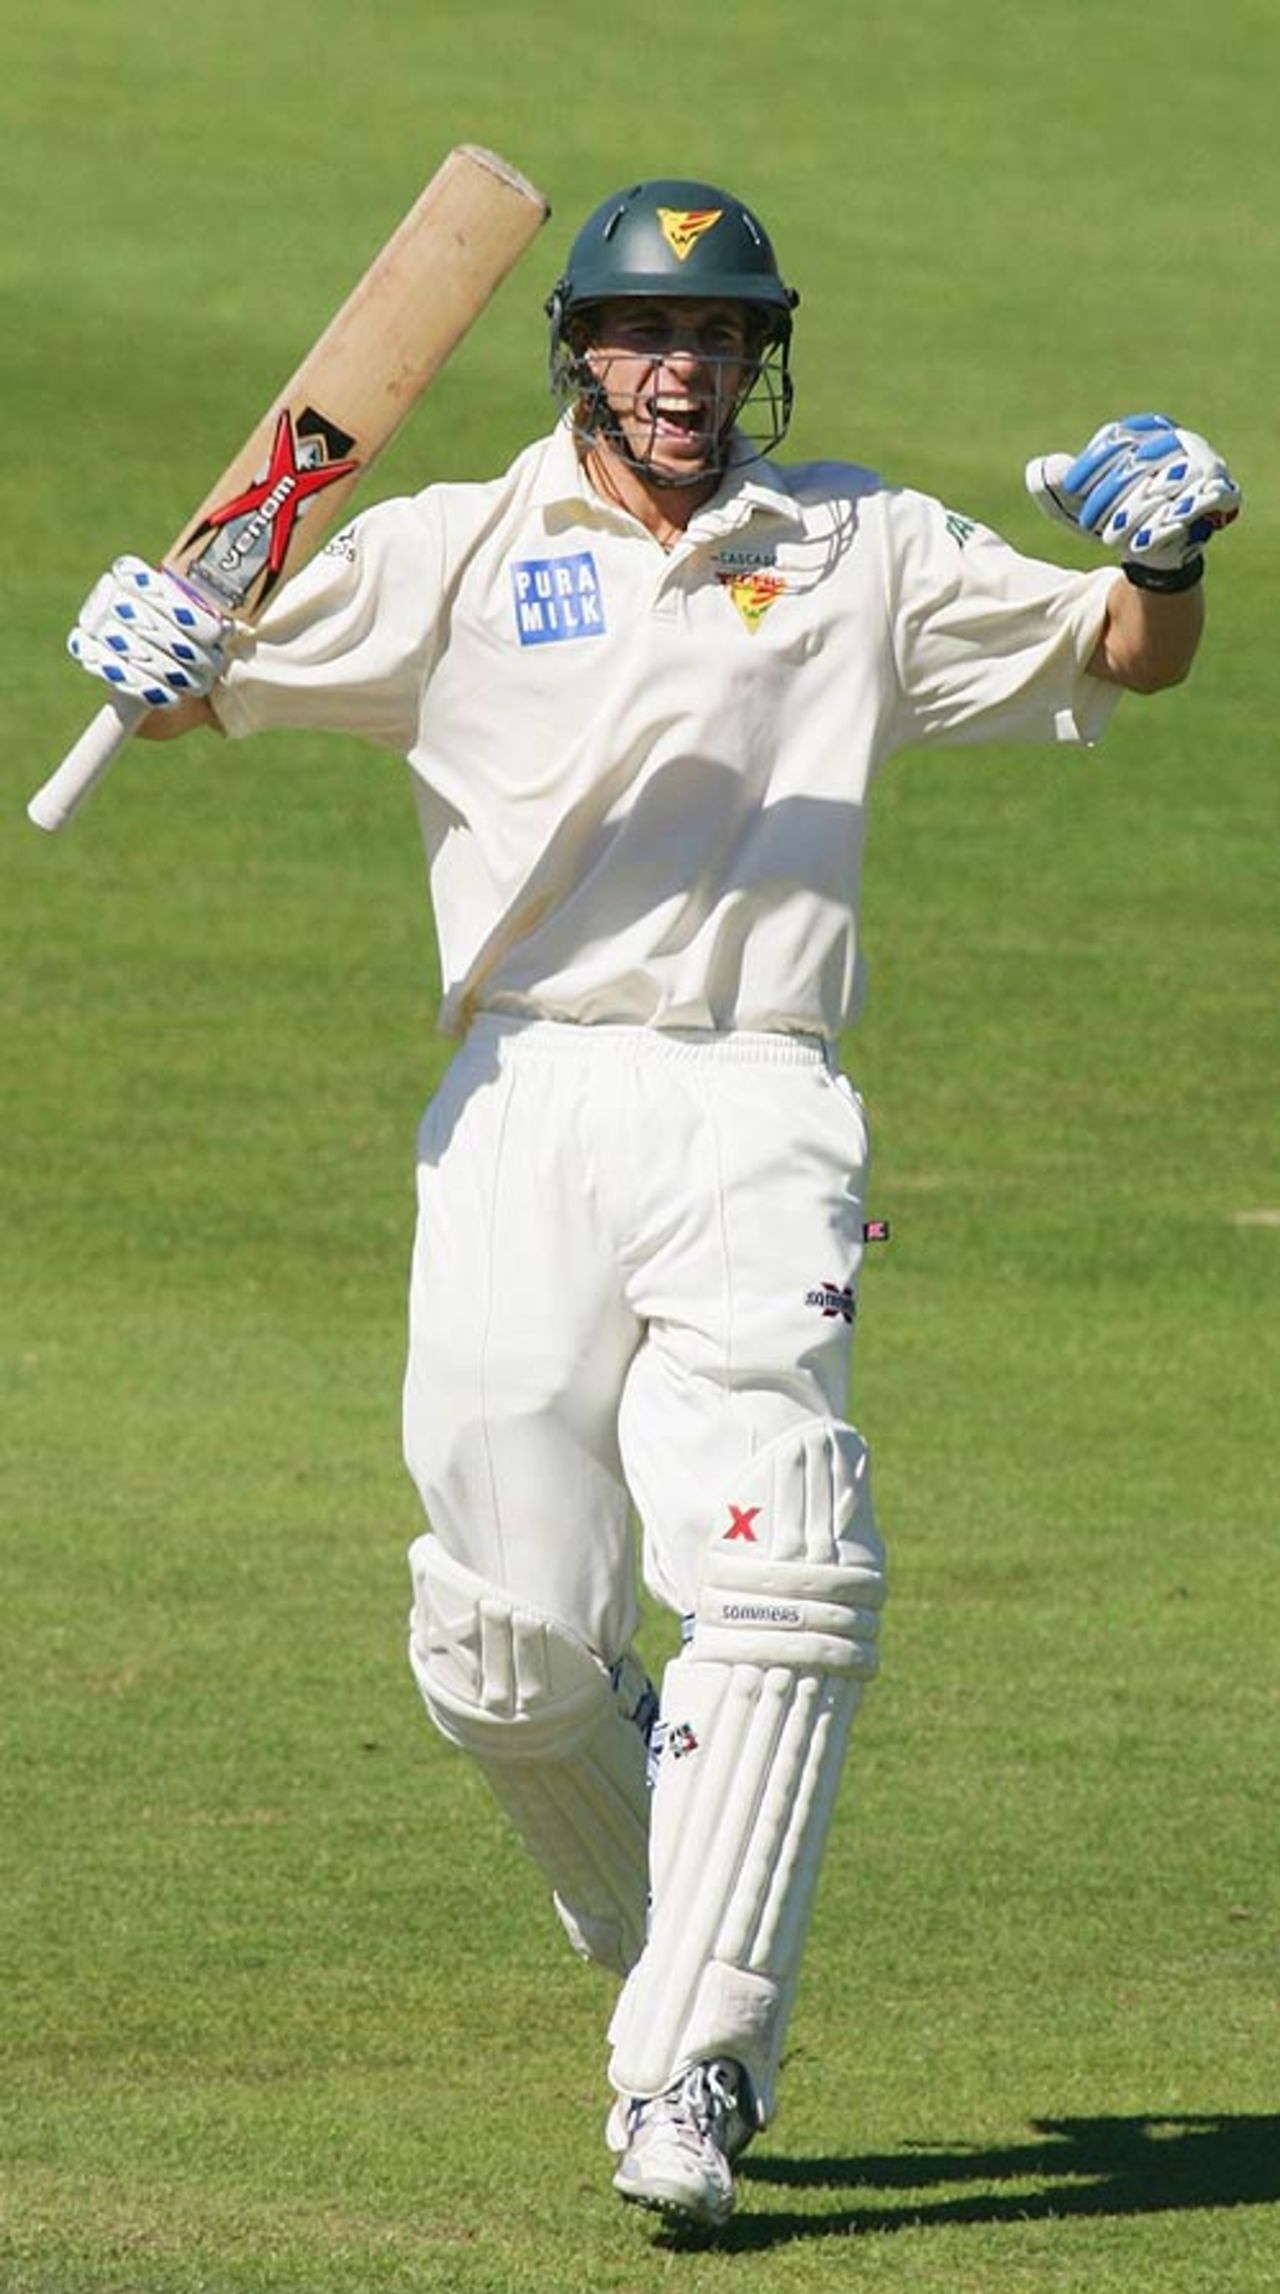 Luke Butterworth shows the excitement of making his first century, Tasmania v New South Wales, Pura Cup final, Hobart, March 22, 2007